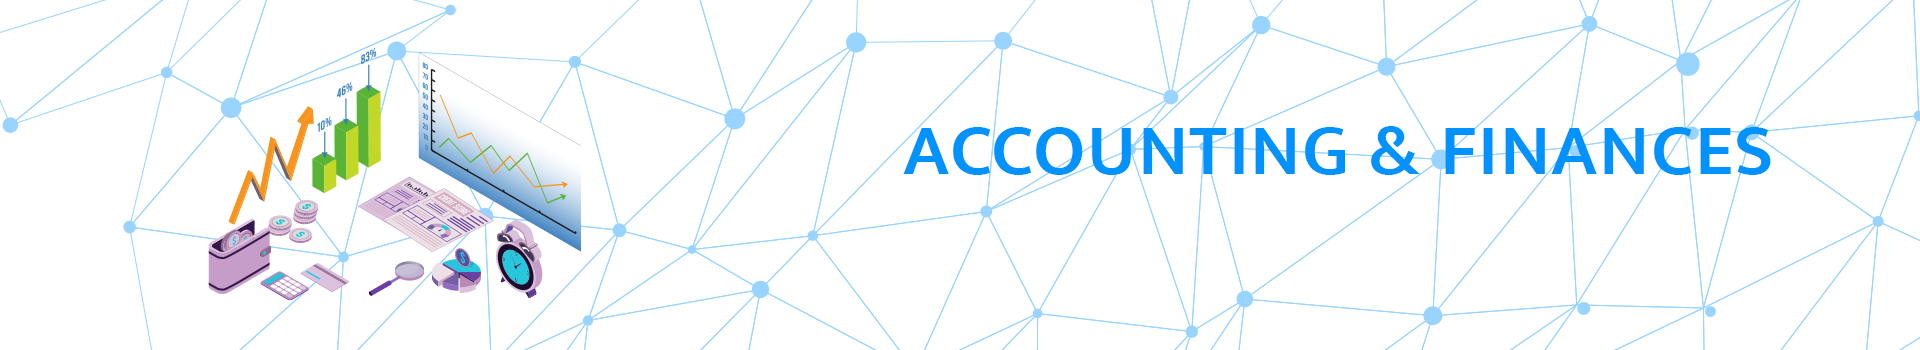 Management of accounts and finances through software